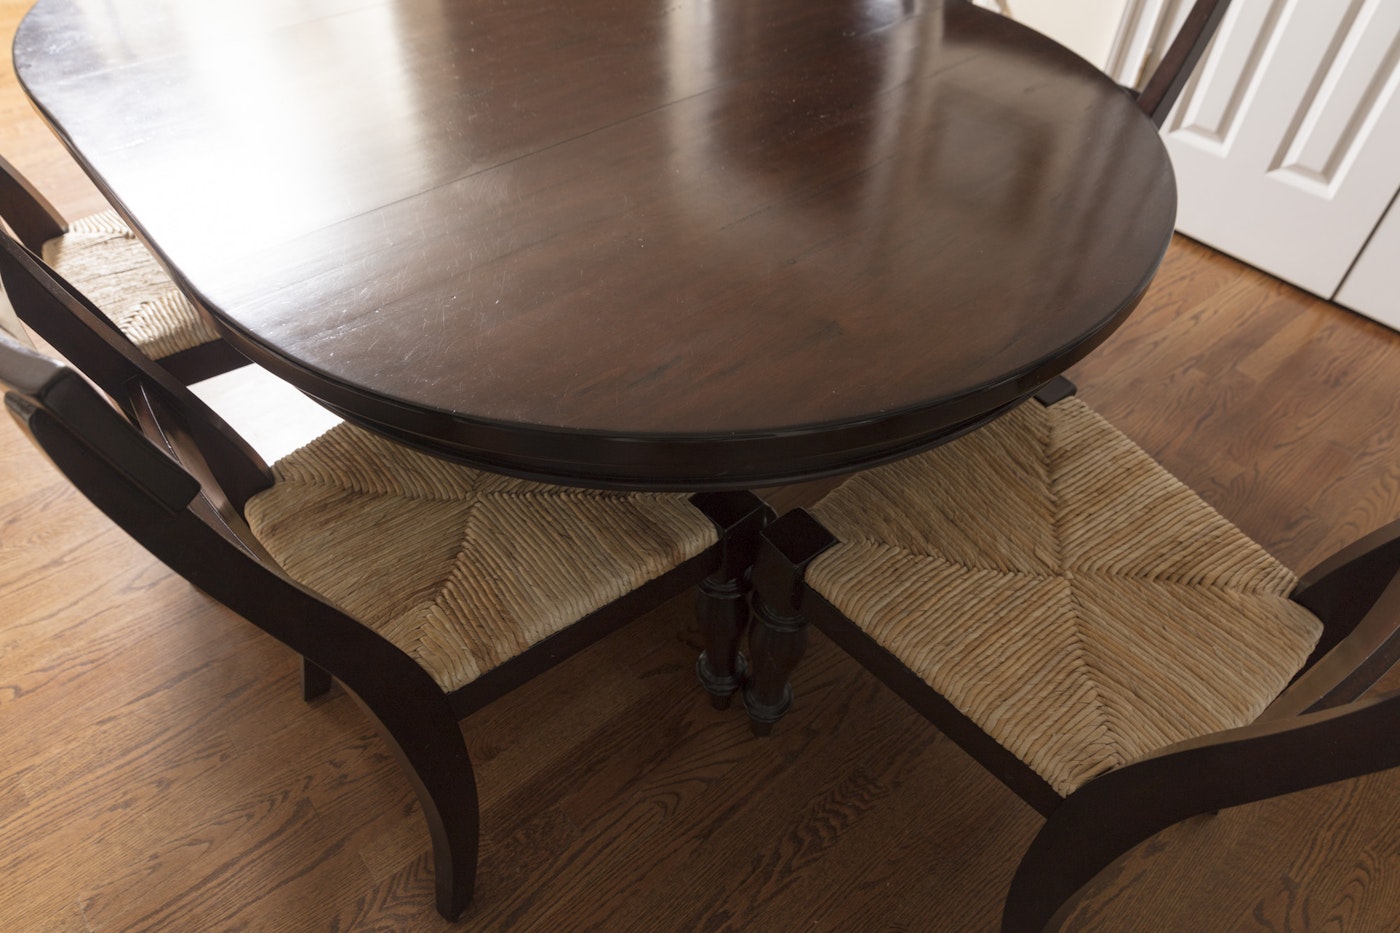 Pottery Barn Square Dining Room Table